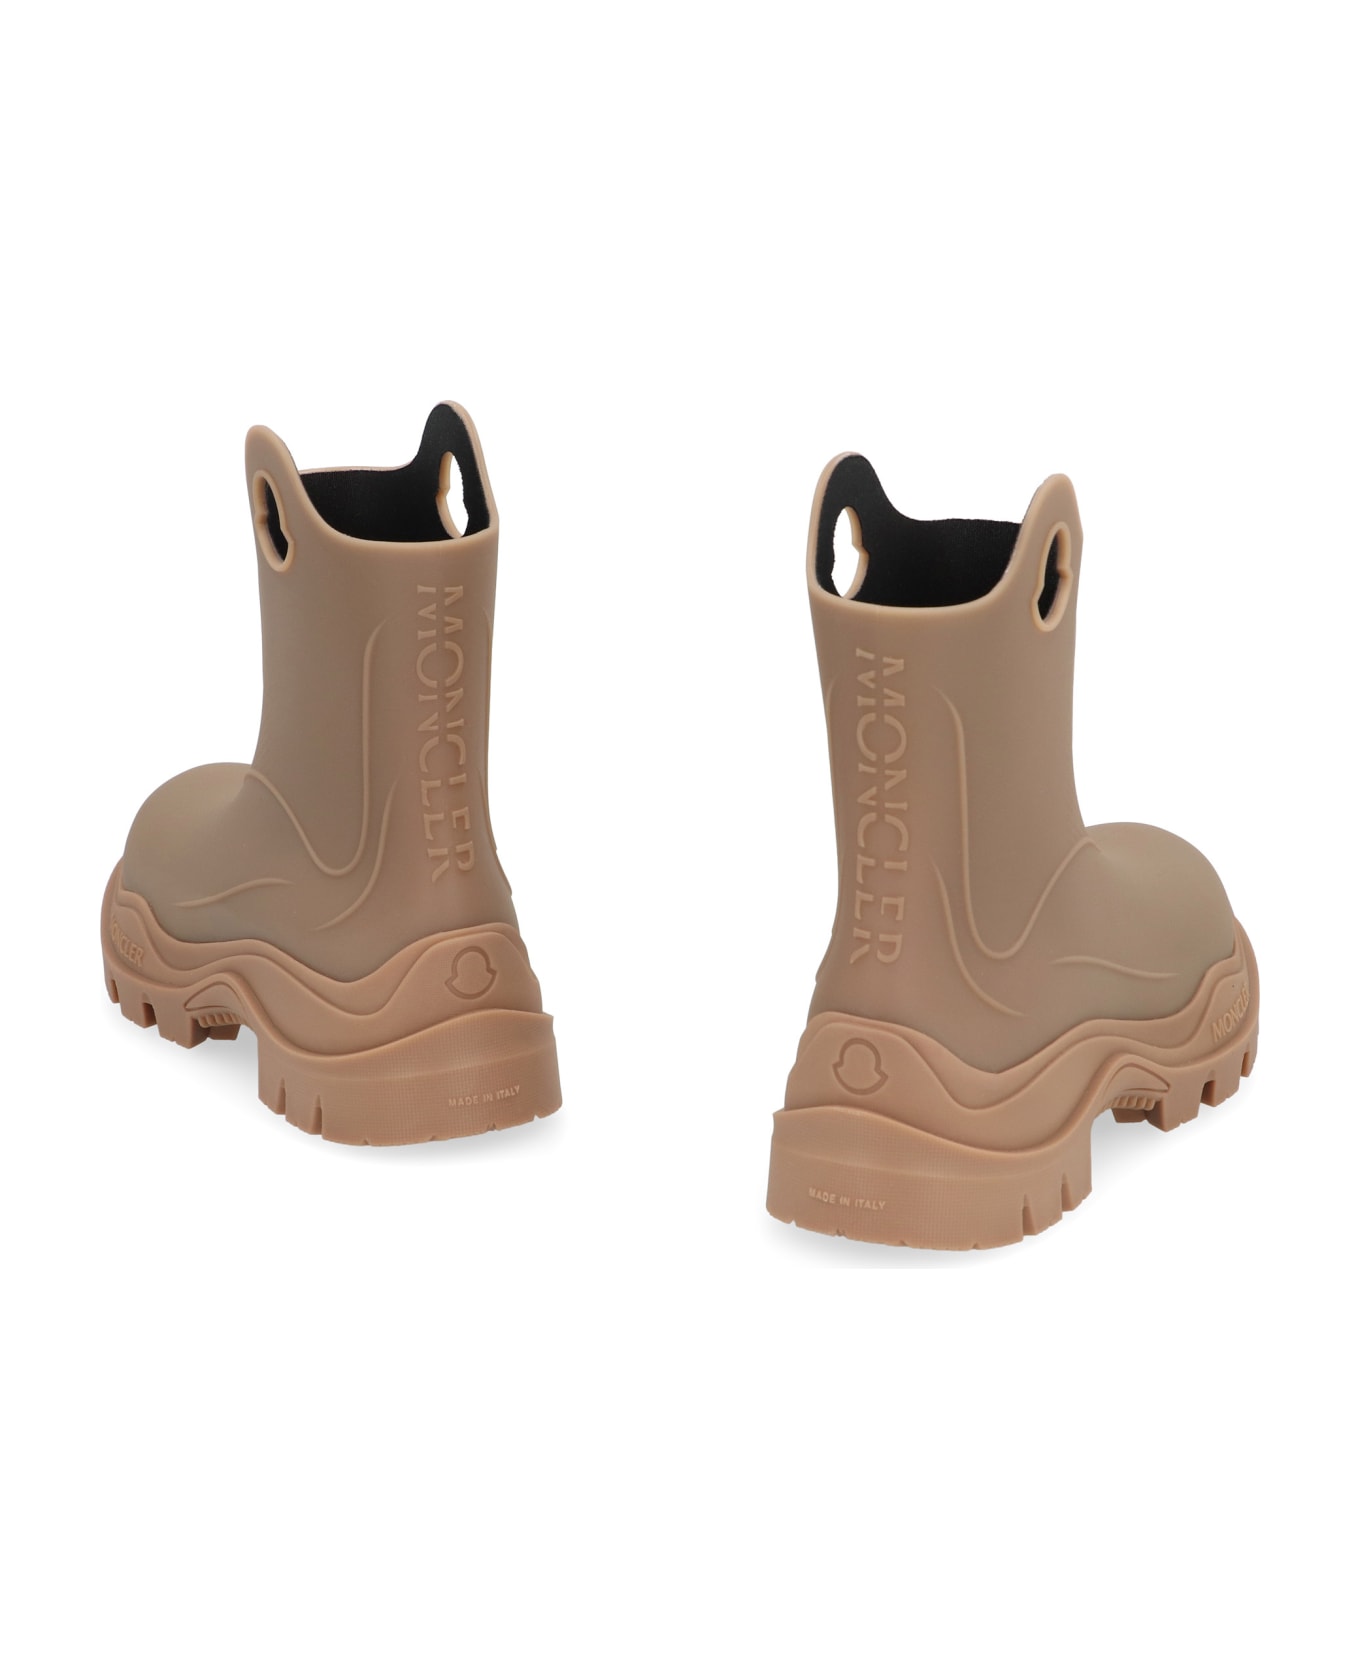 Moncler Misty Rubber Boots - brown